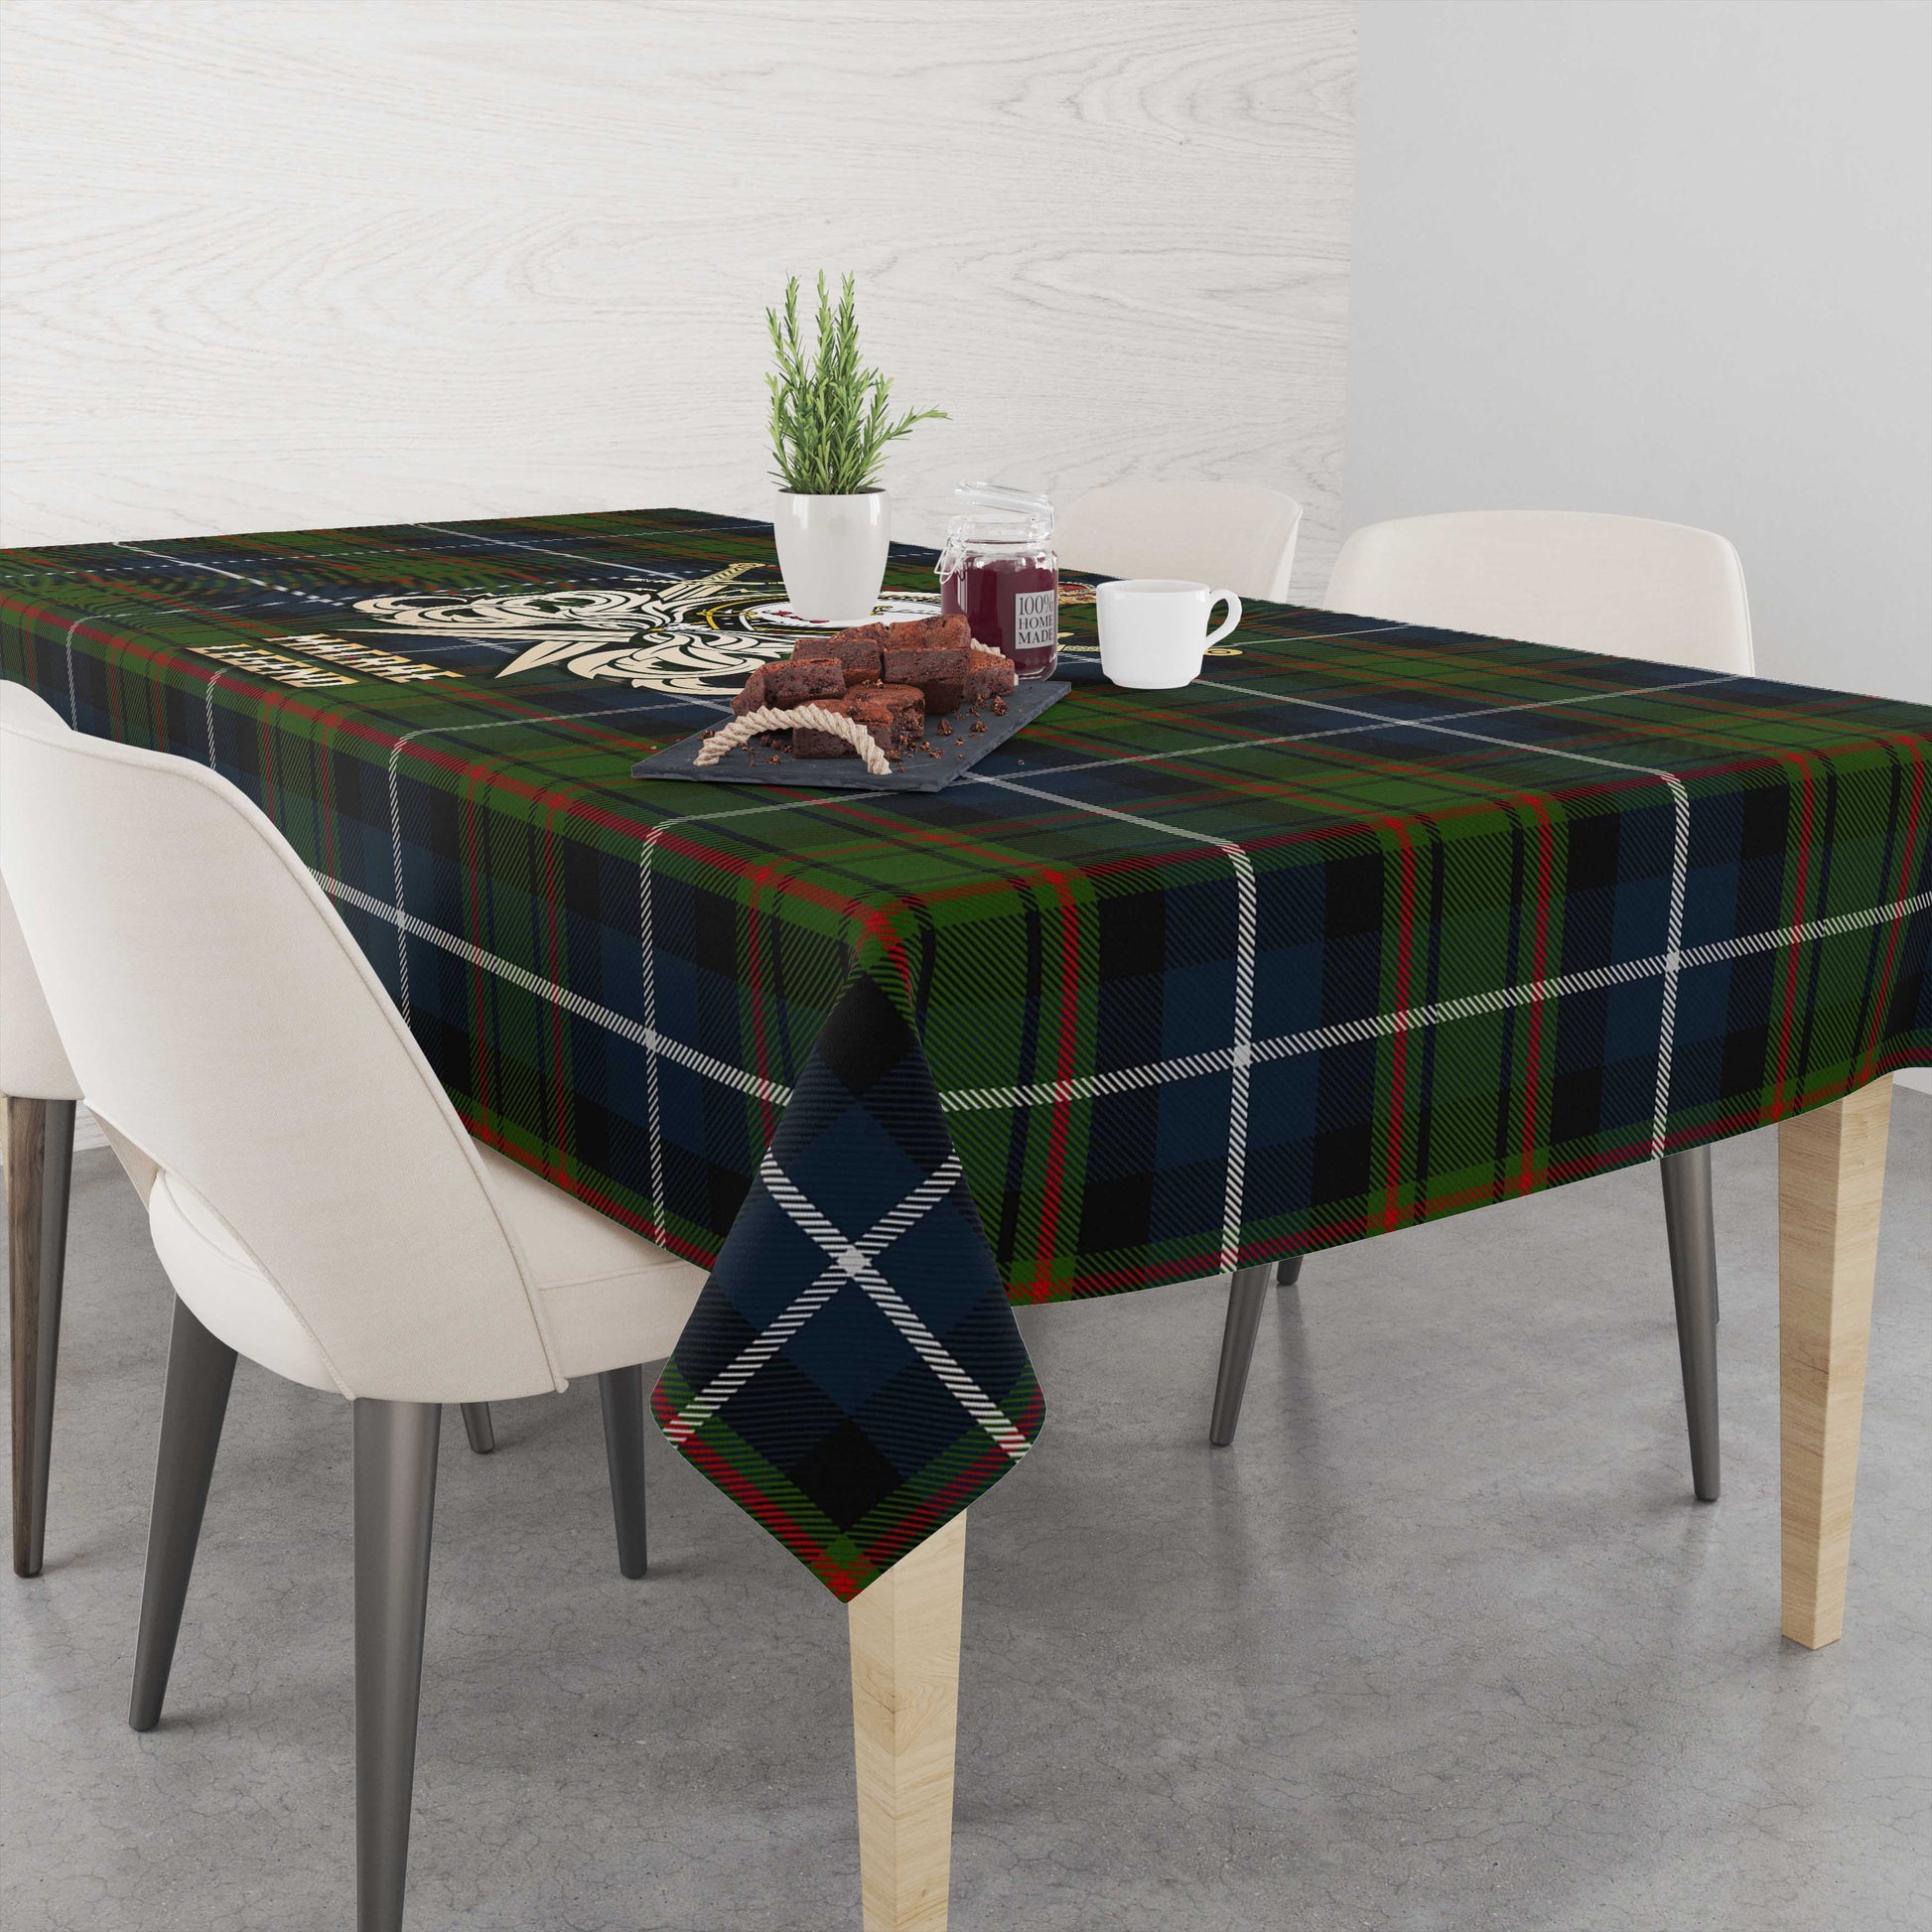 Tartan Vibes Clothing MacRae Hunting Tartan Tablecloth with Clan Crest and the Golden Sword of Courageous Legacy